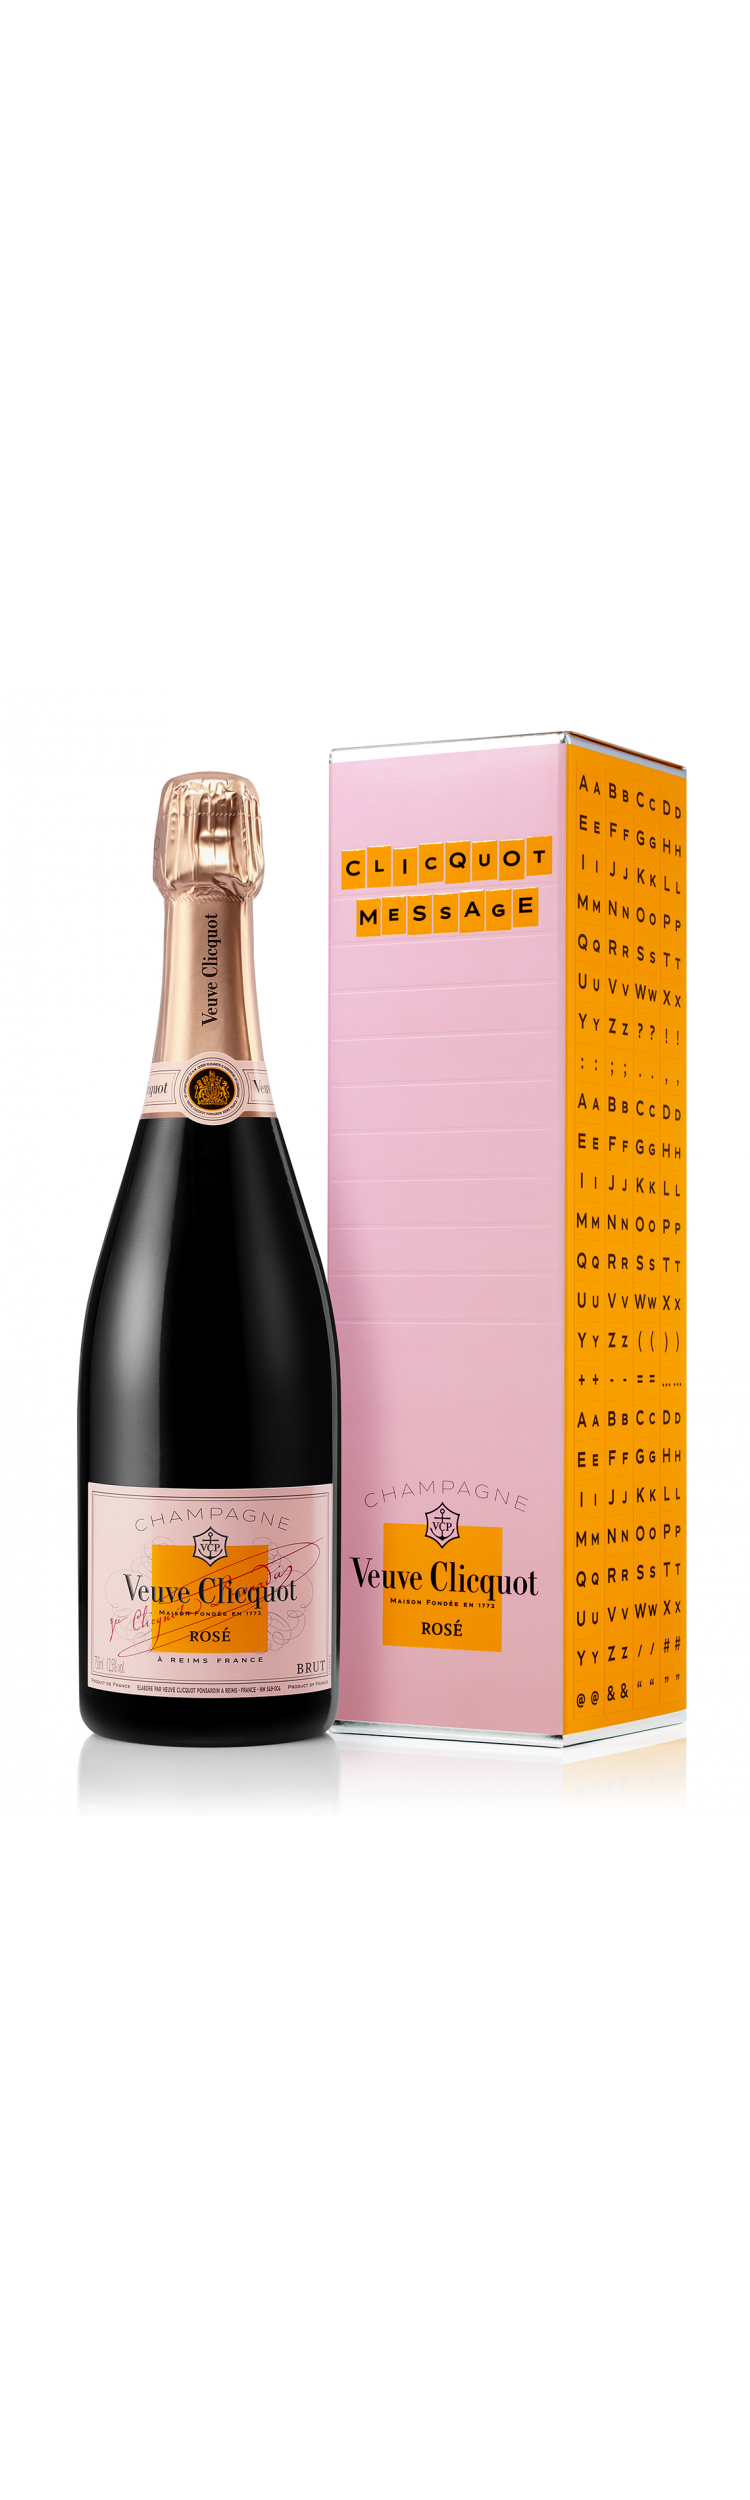 rose-clicquot-message